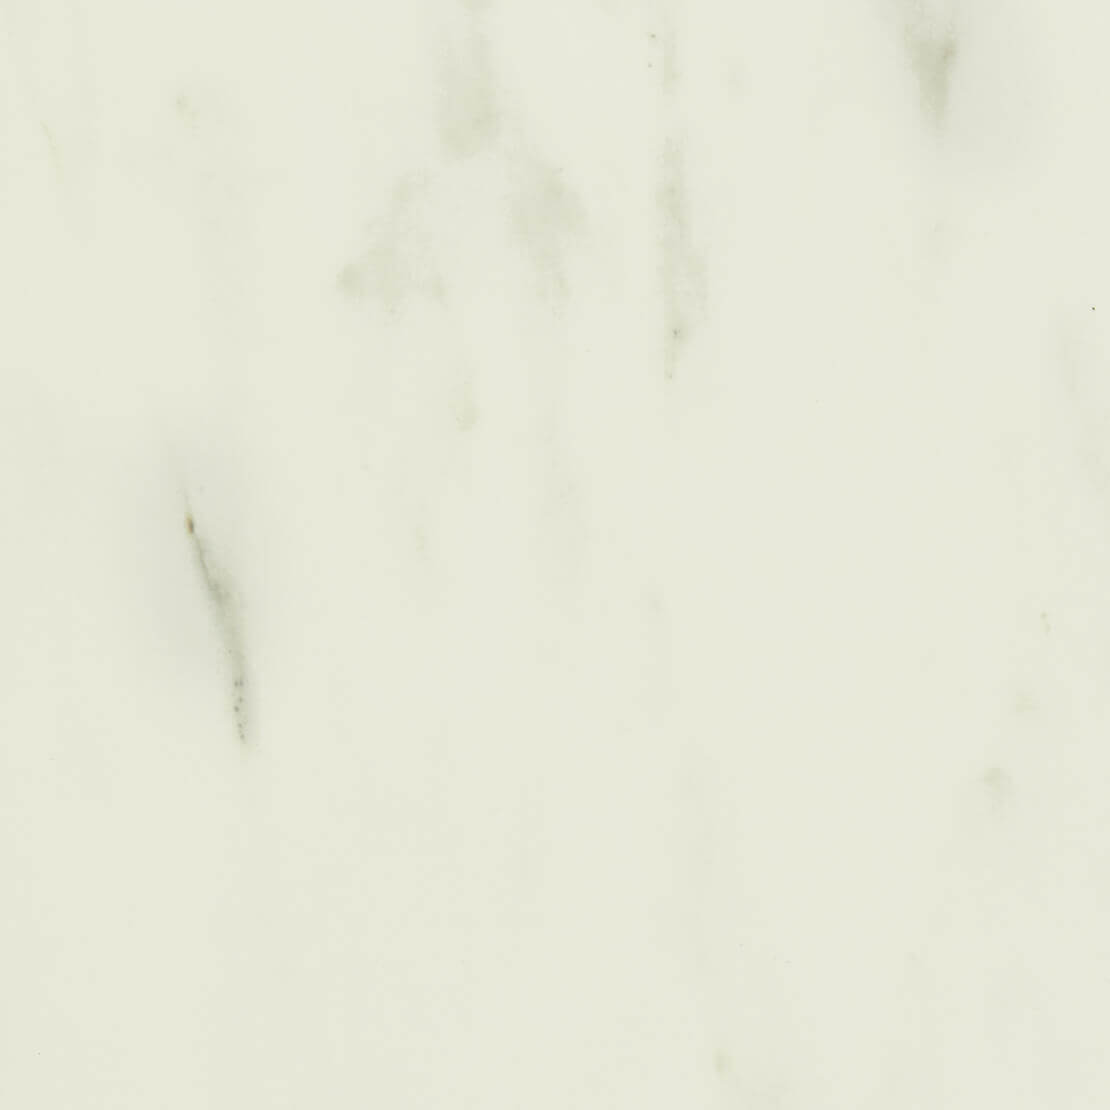 Spectra White Italian Marble décor swatch.